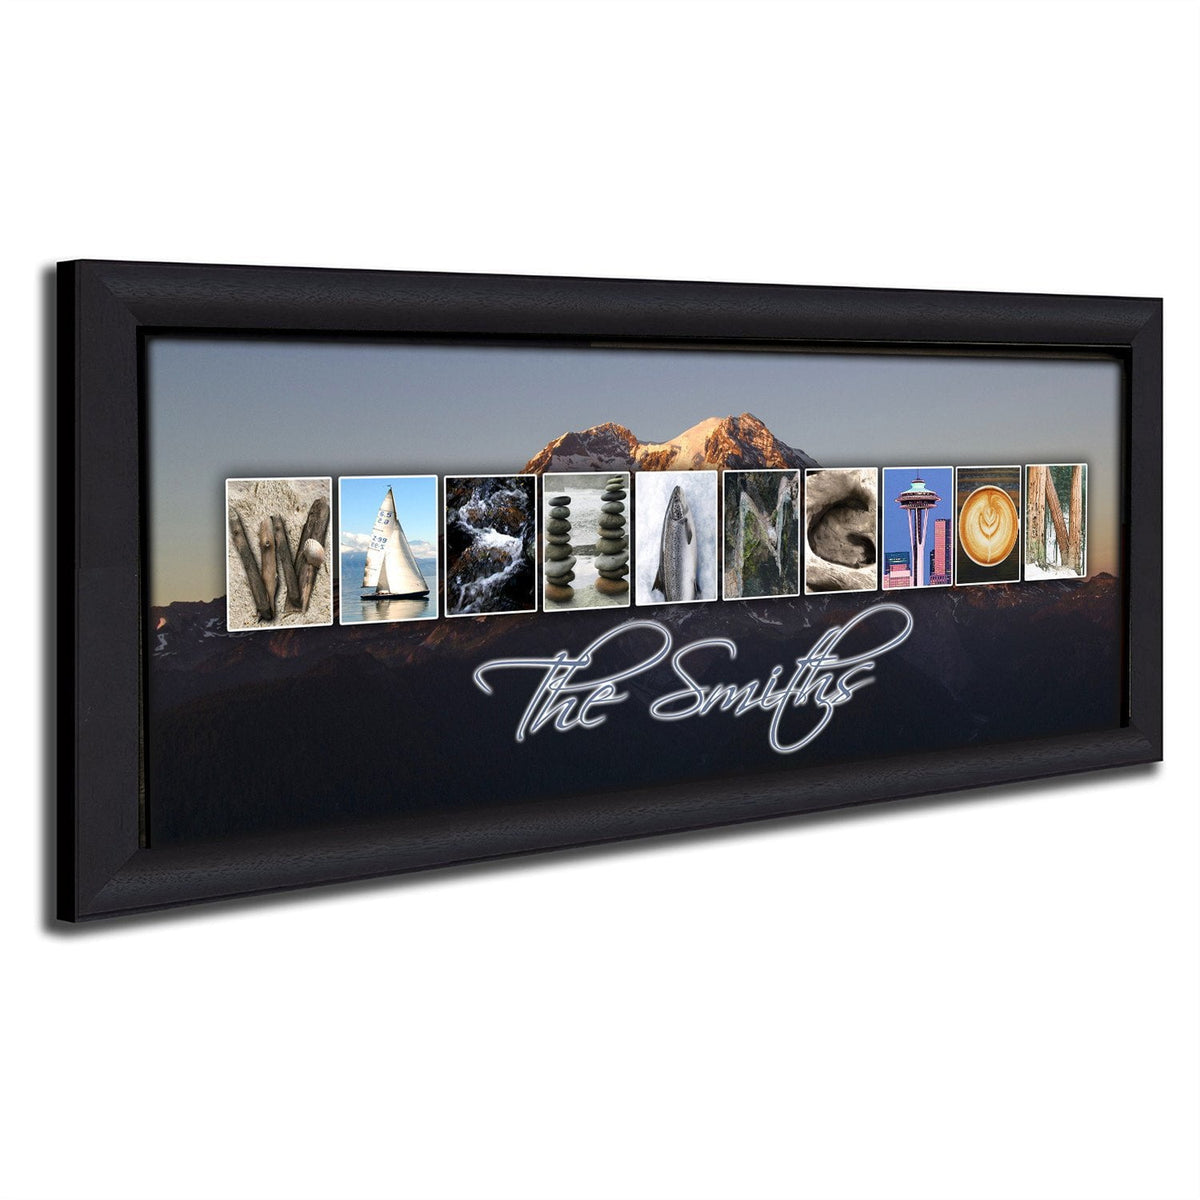 Framed Canvas Washington Art &amp; Photography from Personal Prints